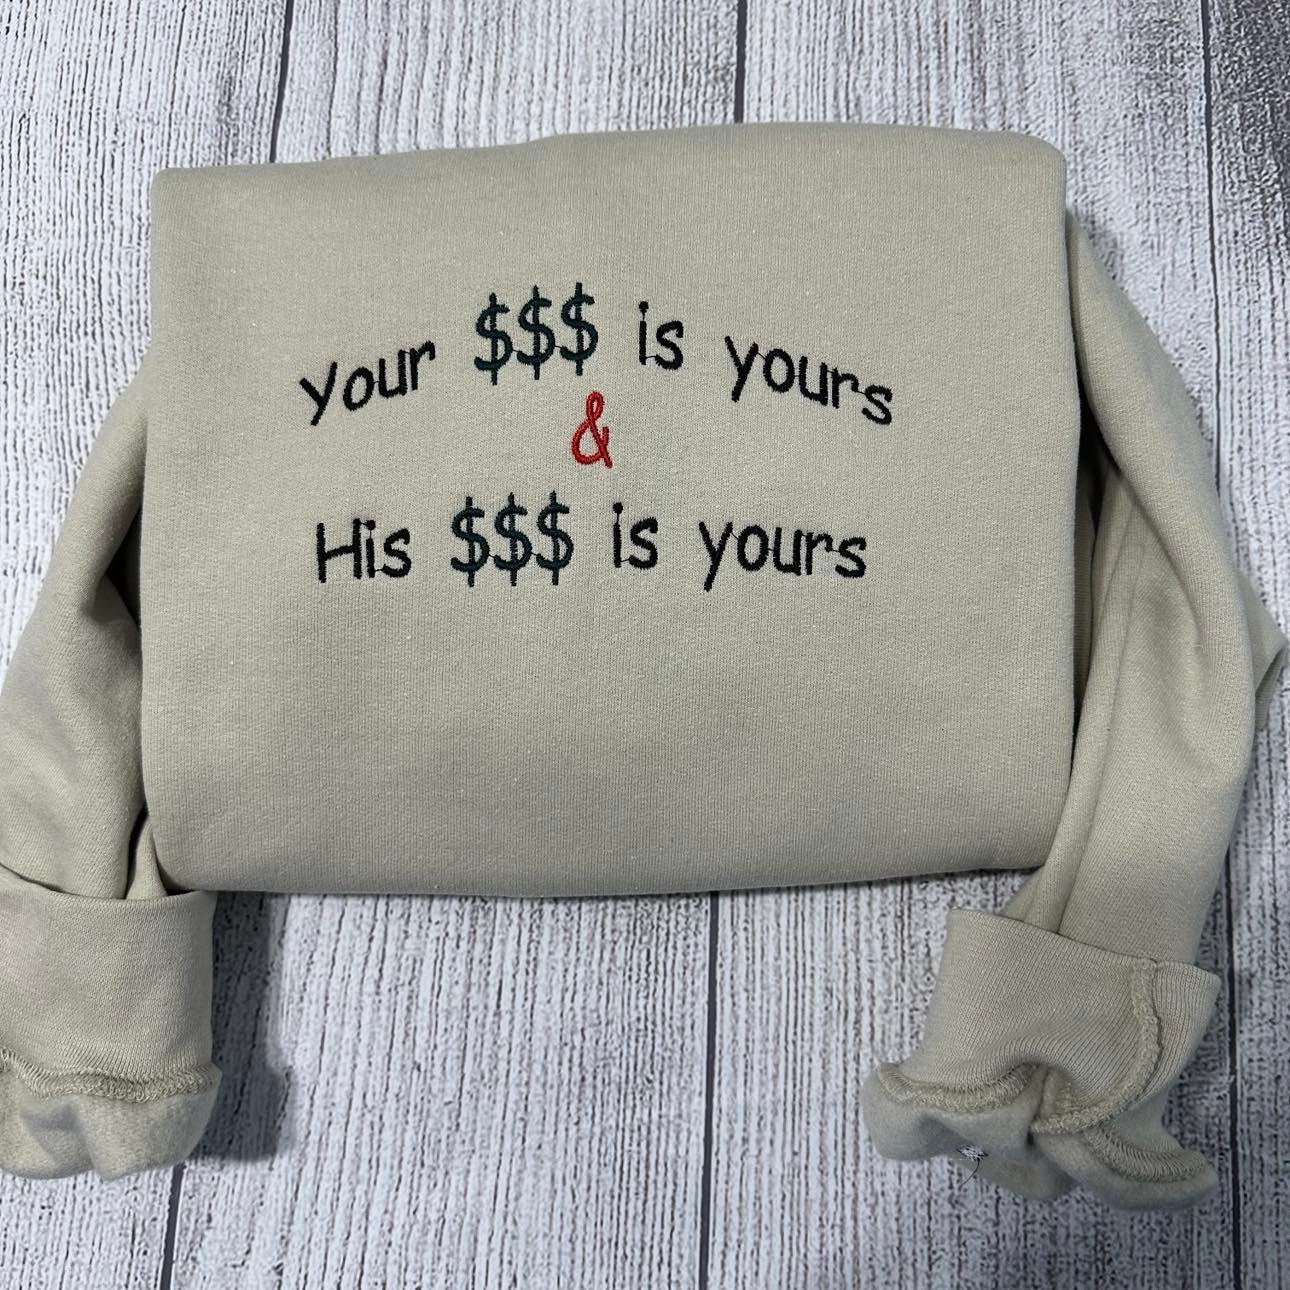 Funny Bridal embroidered sweatshirt; your money is yours and his money is yours crewneck; custom bride sweater